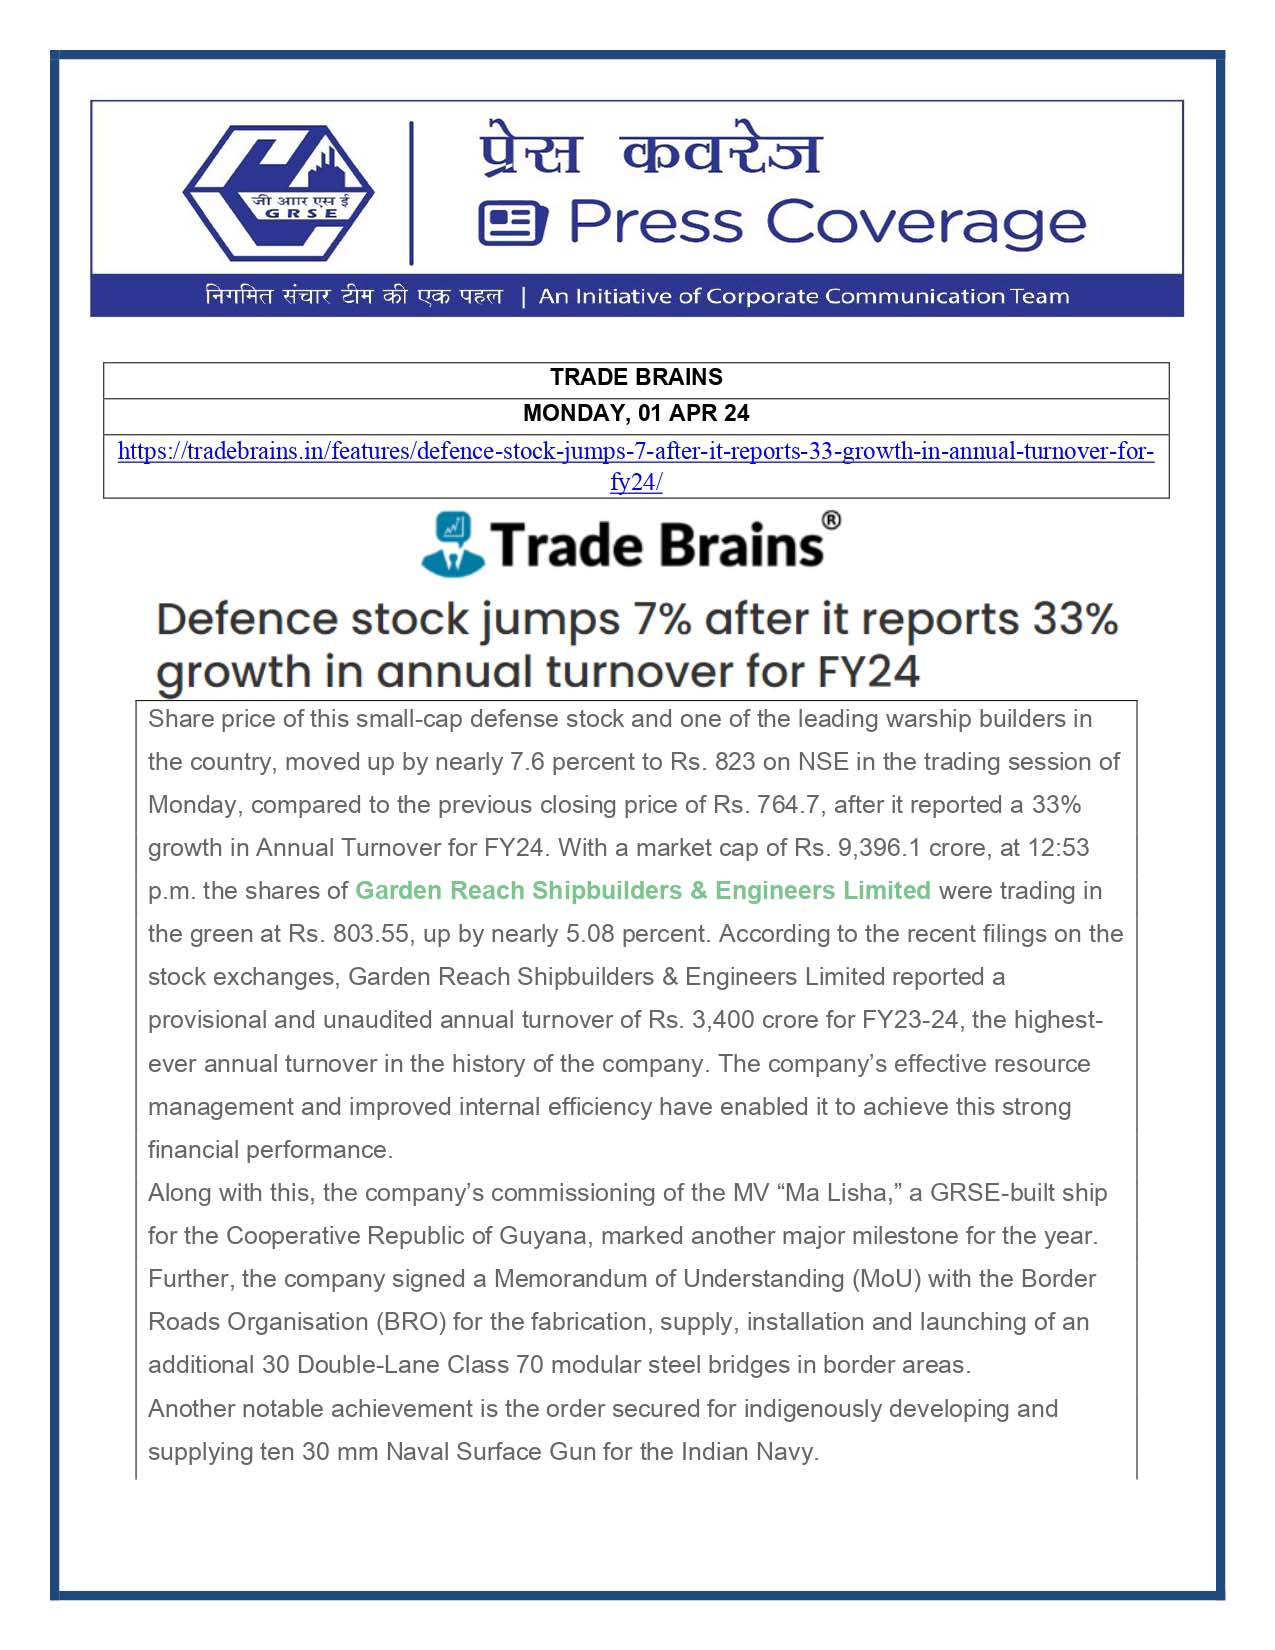 Press Coverage : Trade Brains, 01 Apr 24 : Defence stocks jumps 7% after it reports 33% growth in annual turnover for FY24